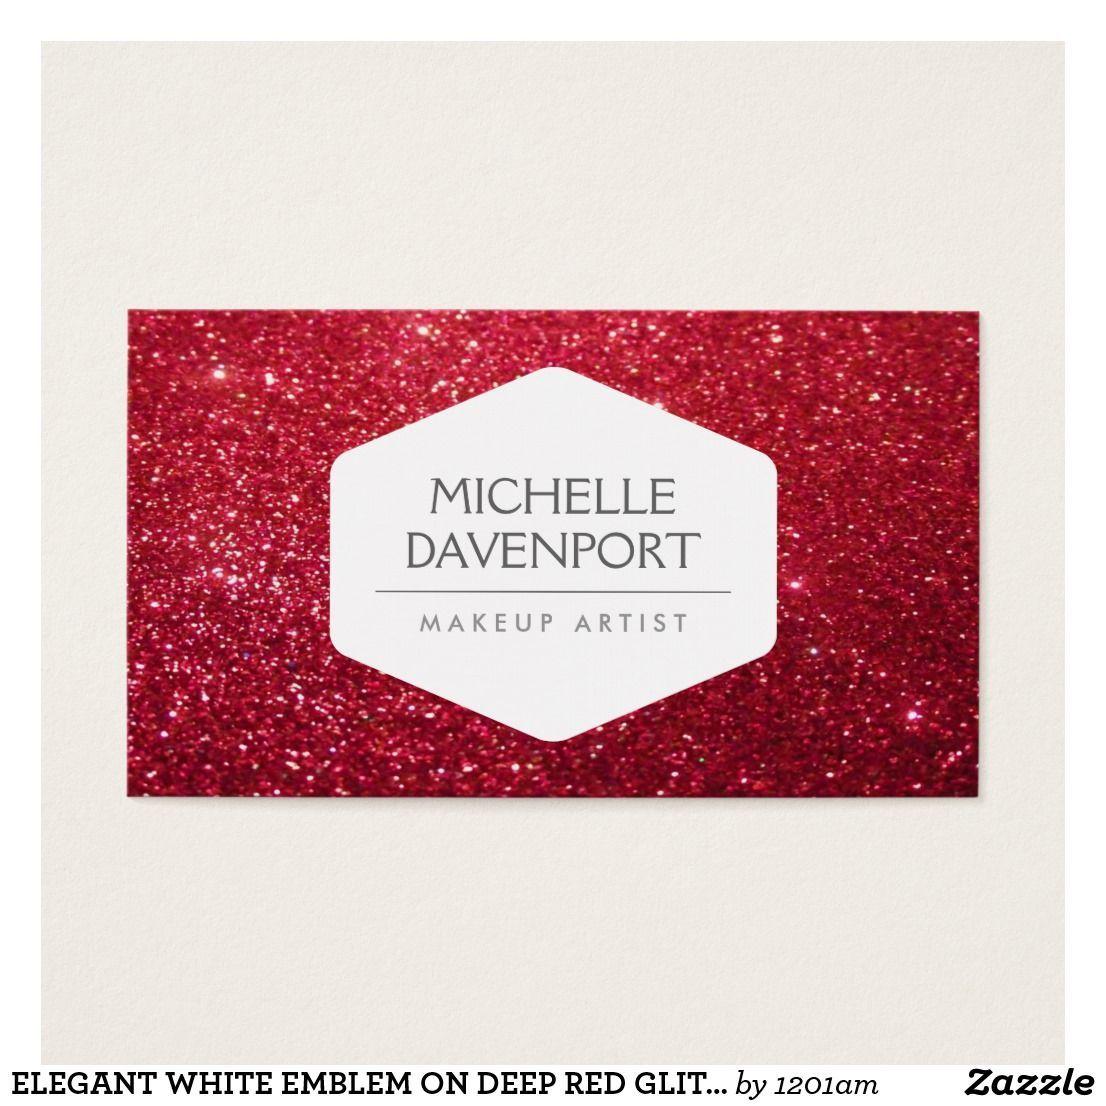 White and Red Hexagon Logo - Elegant white emblem on deep red glitter business card. { Products